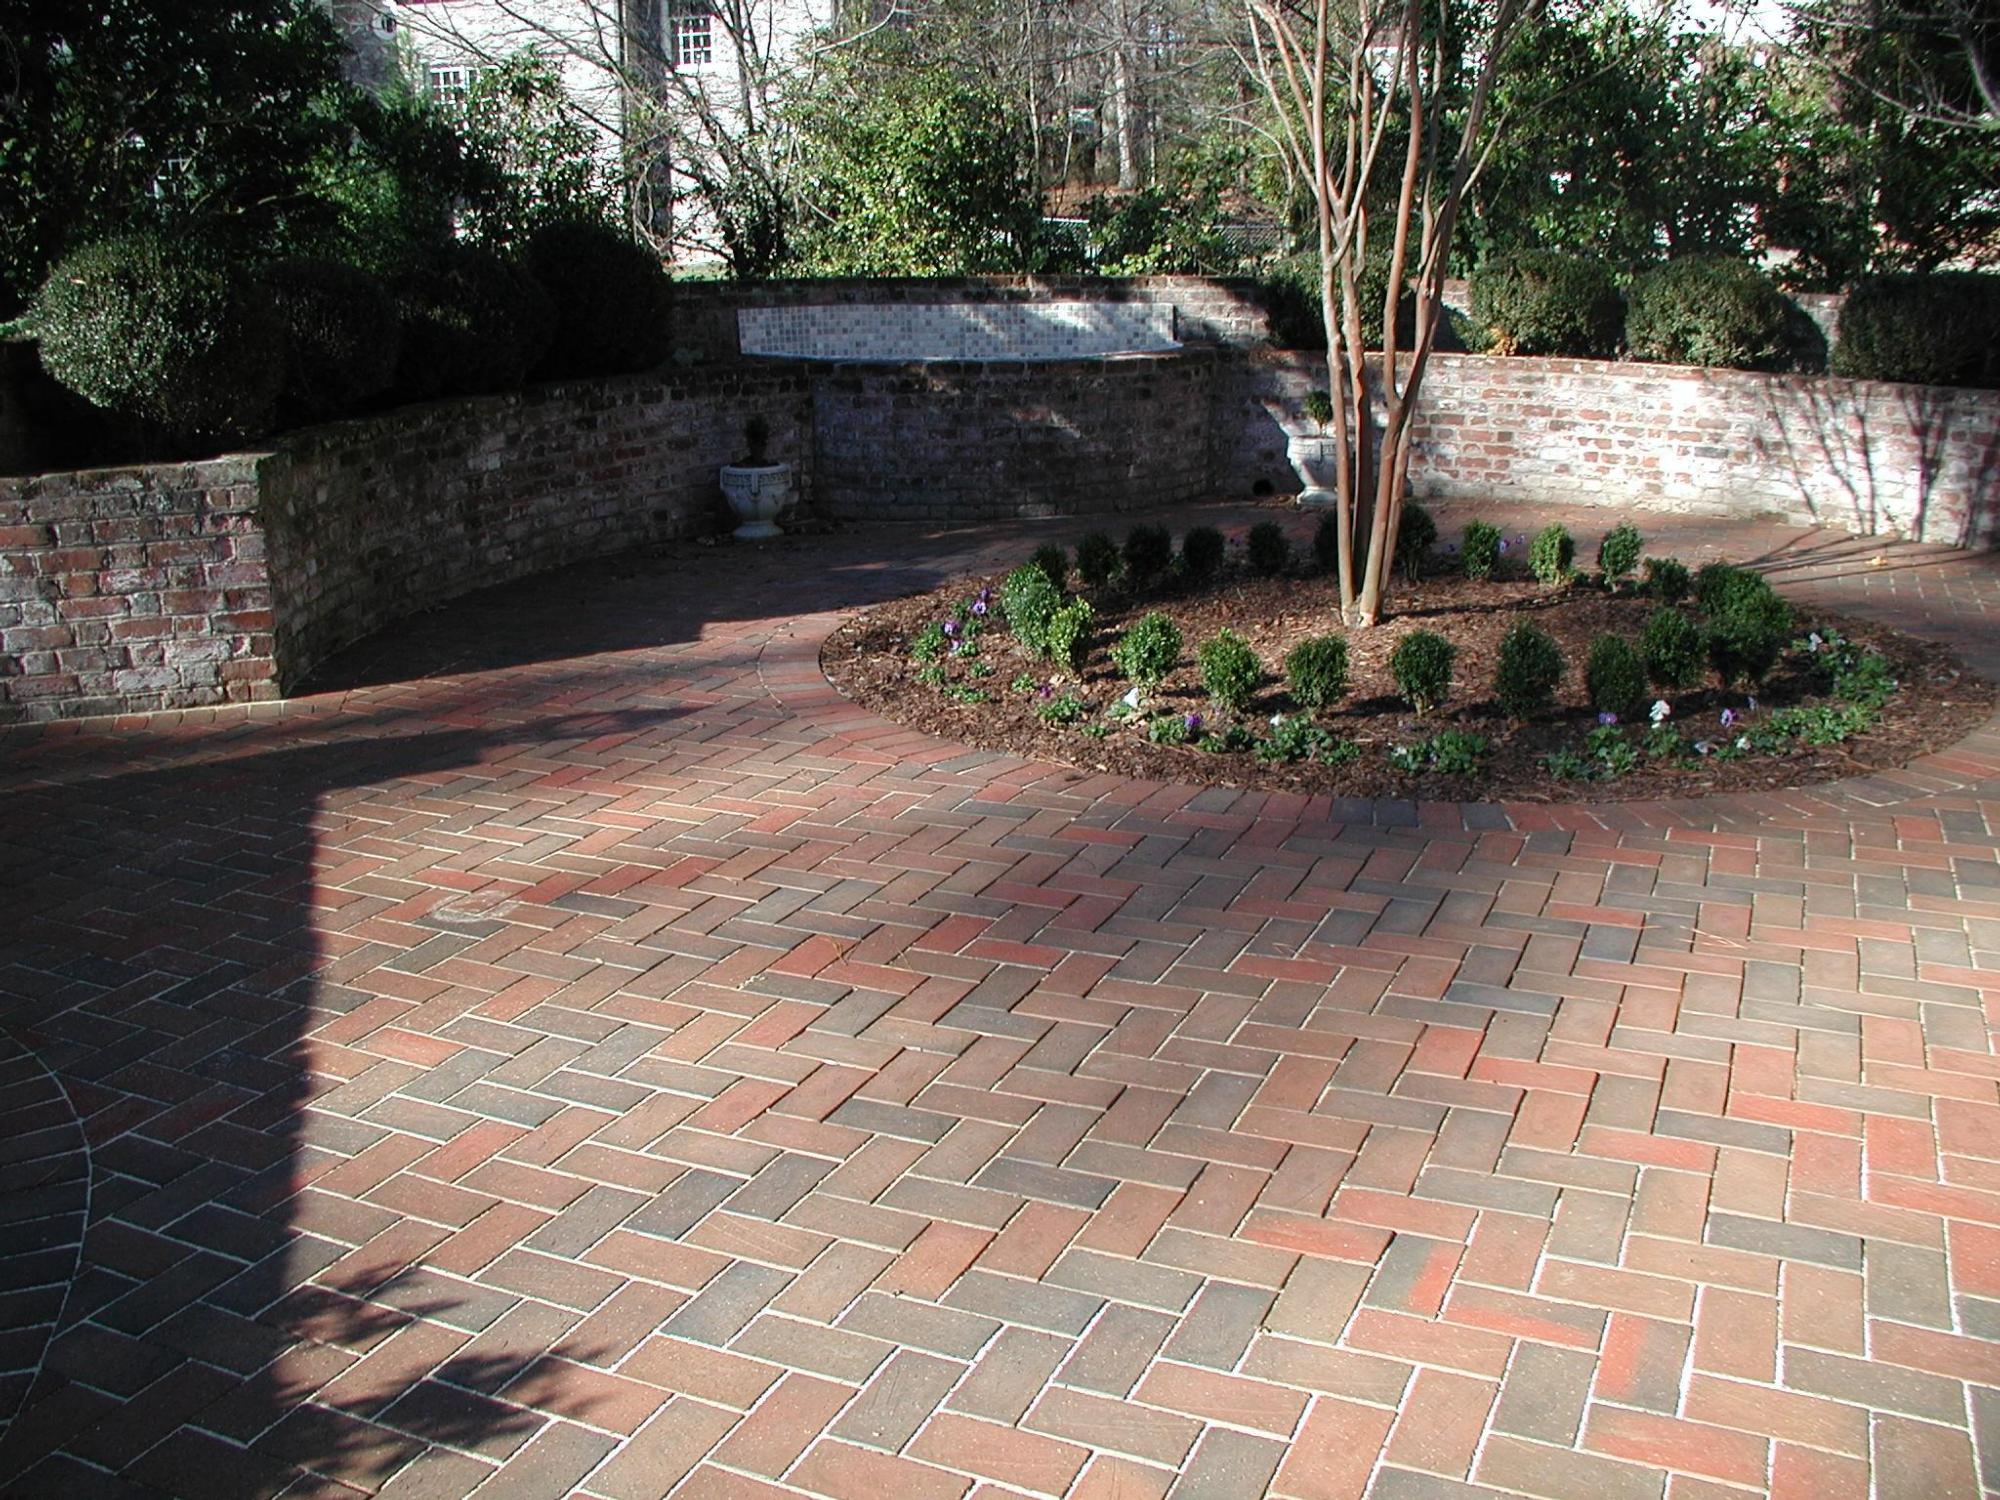 An image of a bricked patio